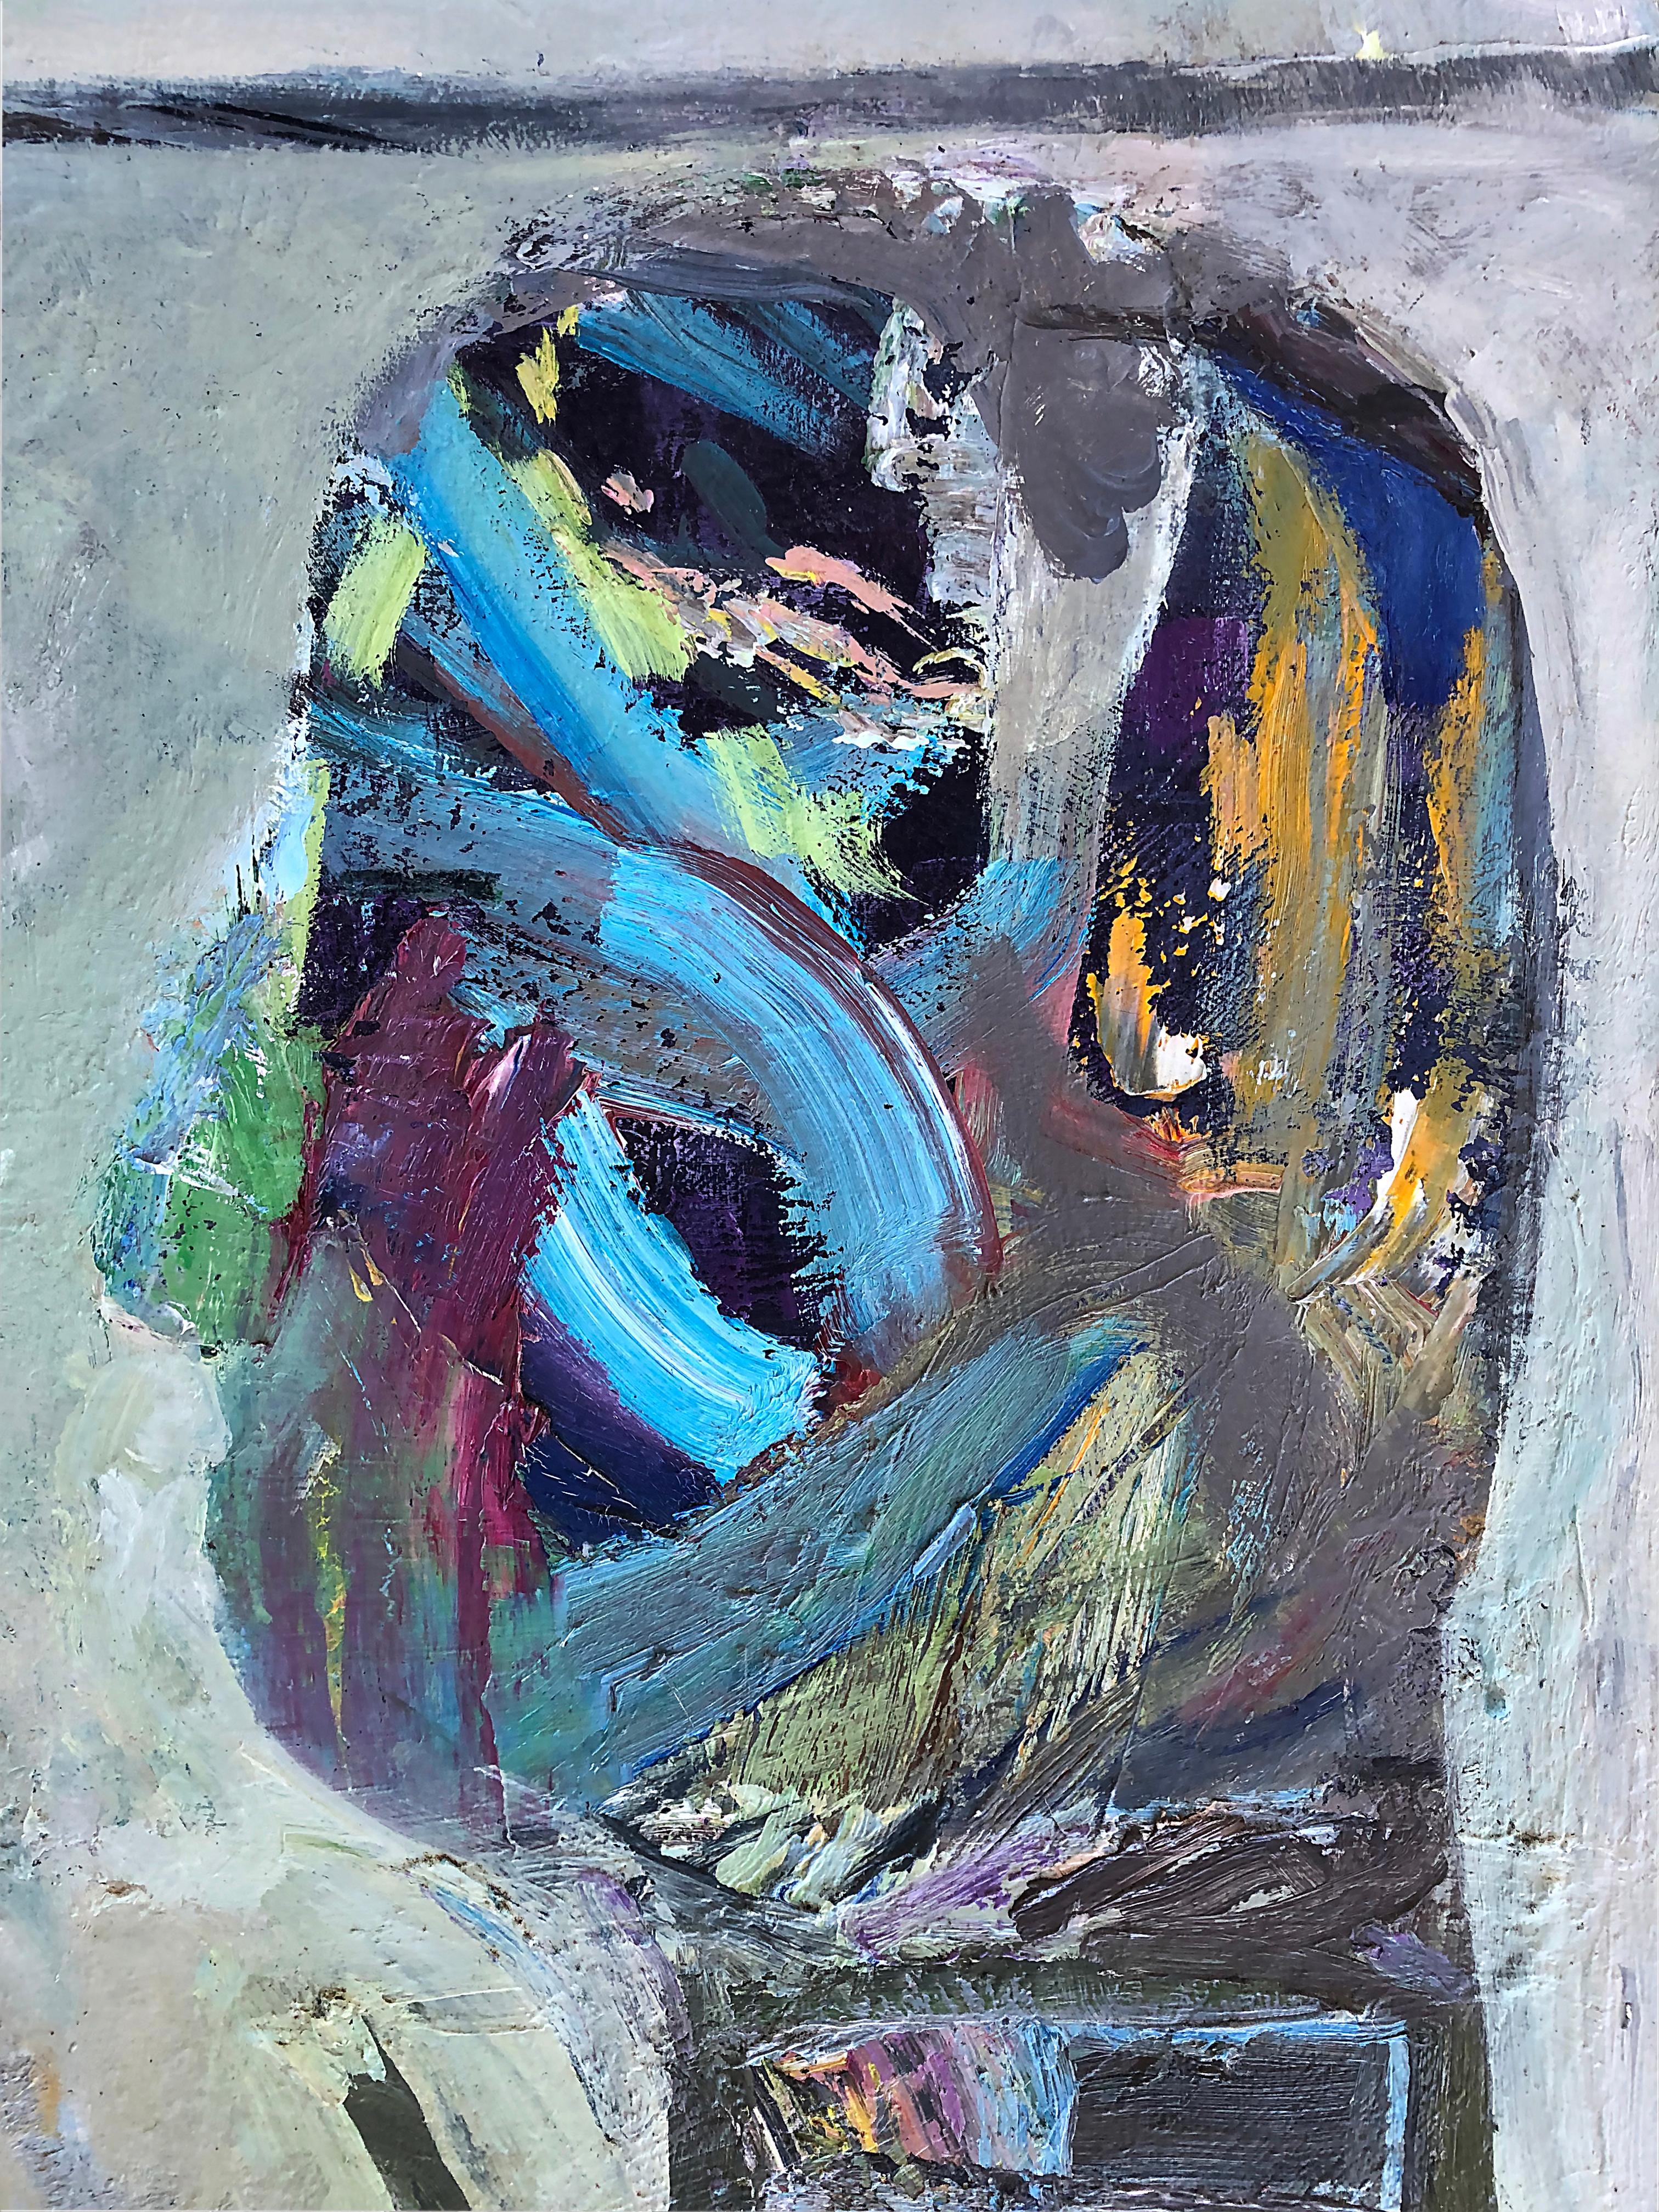 Vintage Warren Fischer figurative abstract painting.

Offered for sale is a figurative abstract painting on canvas by the American artist Warren Fischer (1943-2001). The painting is part of the artist's estate. Fischer used great impasto texture